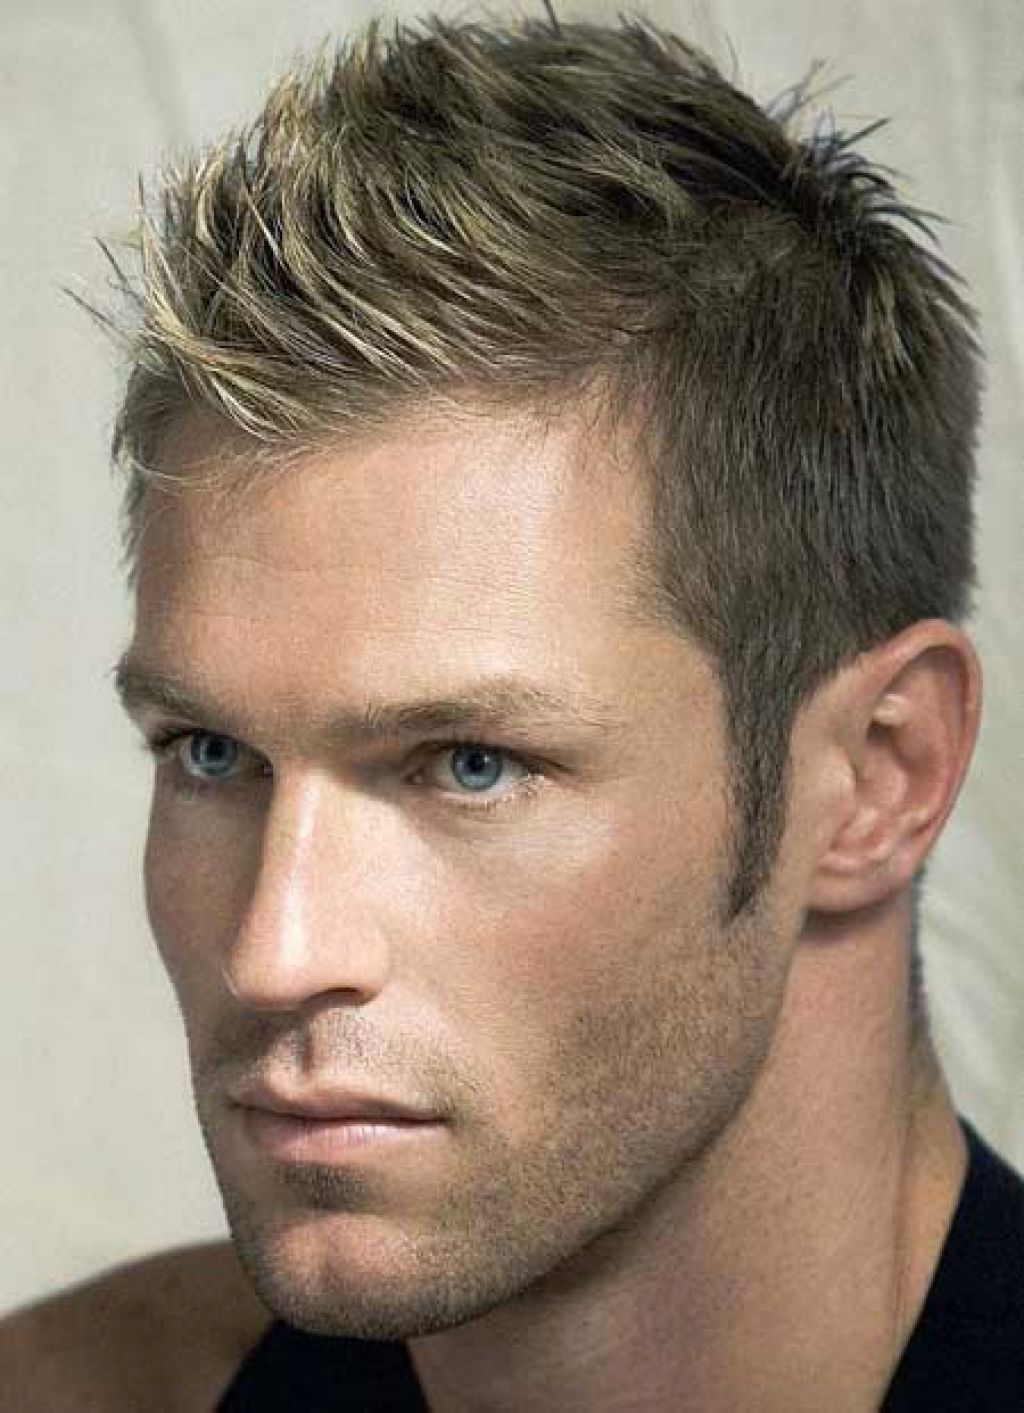 The Best Of Short Hair Cuts For Men Is Here Right Now With 6 In 2018 Spiked Blonde Mohawk Haircuts (View 2 of 15)